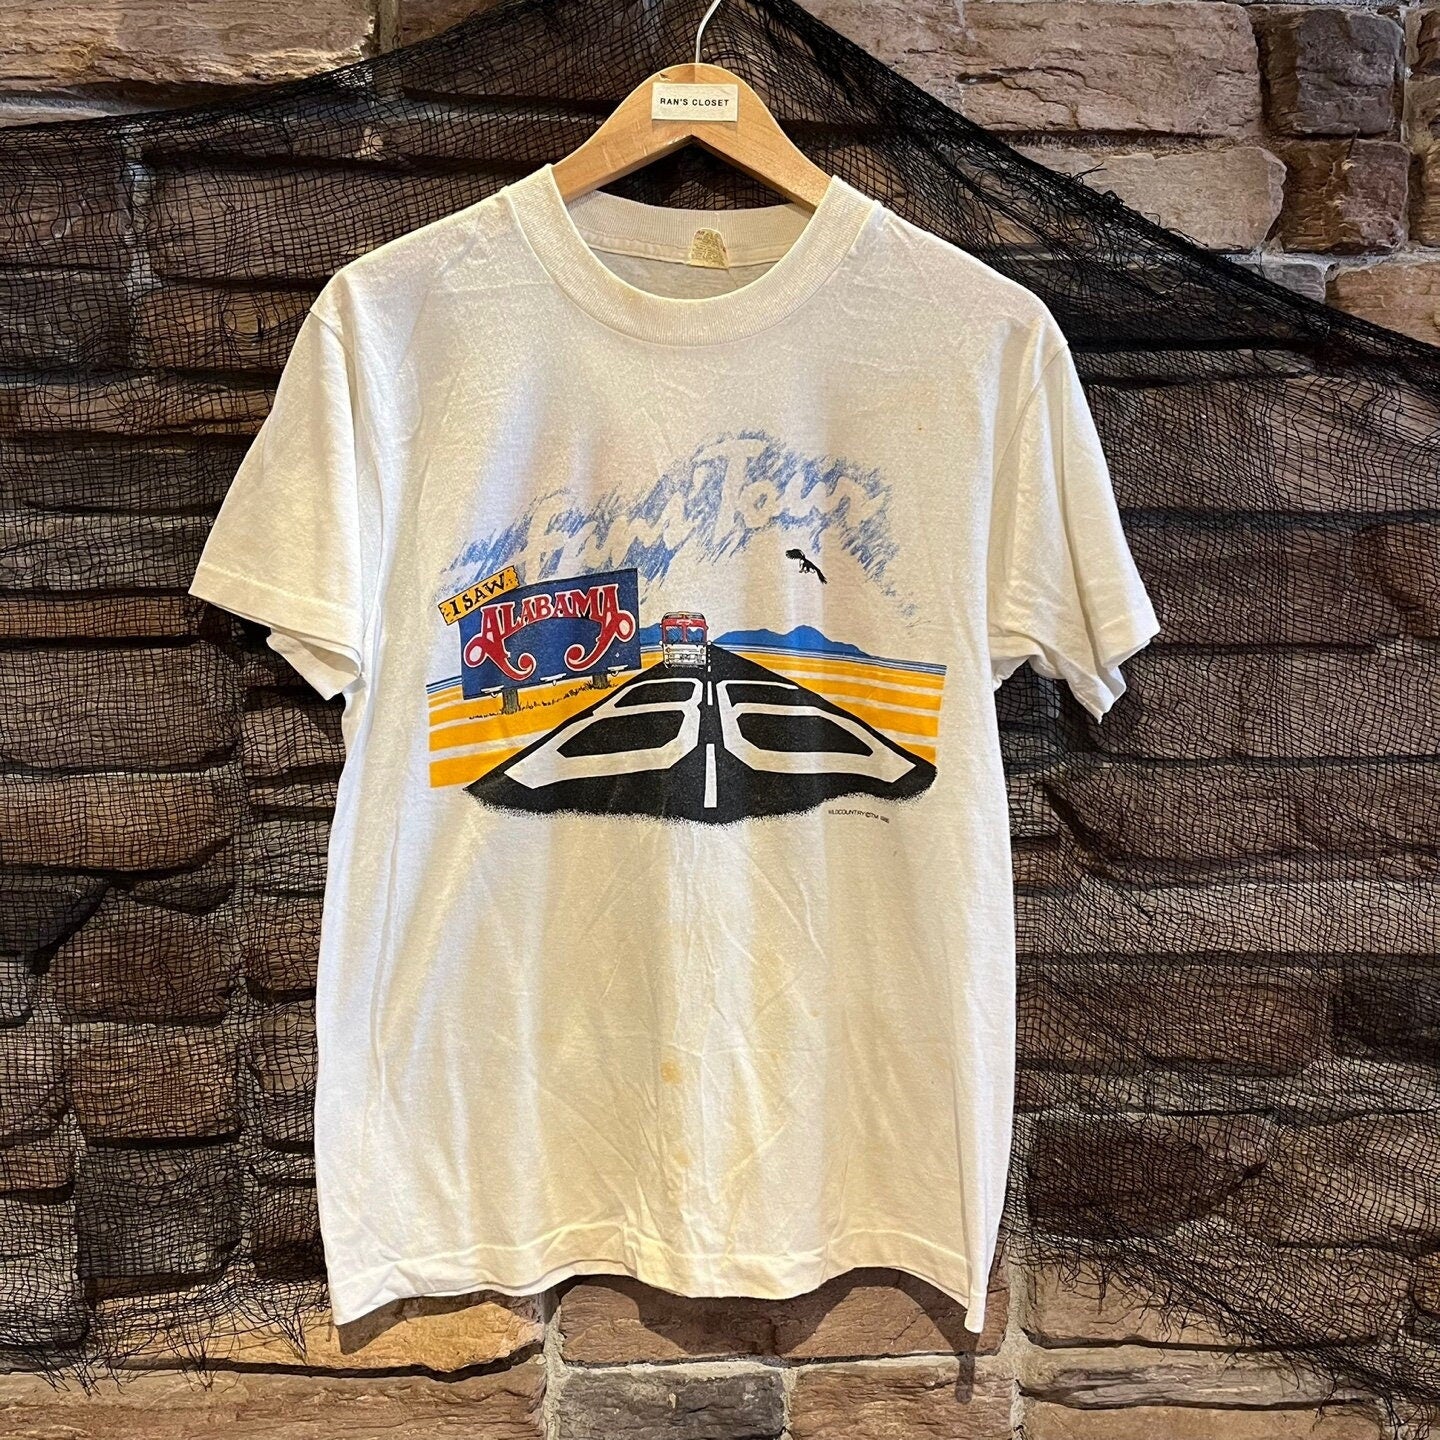 Vintage 1986 Alabama "The Fans Tour" T-Shirt | Vintage Country Music Tee | Vintage Band Tee | 80s Graphic Tee | Size L | SKU: STQ-3344